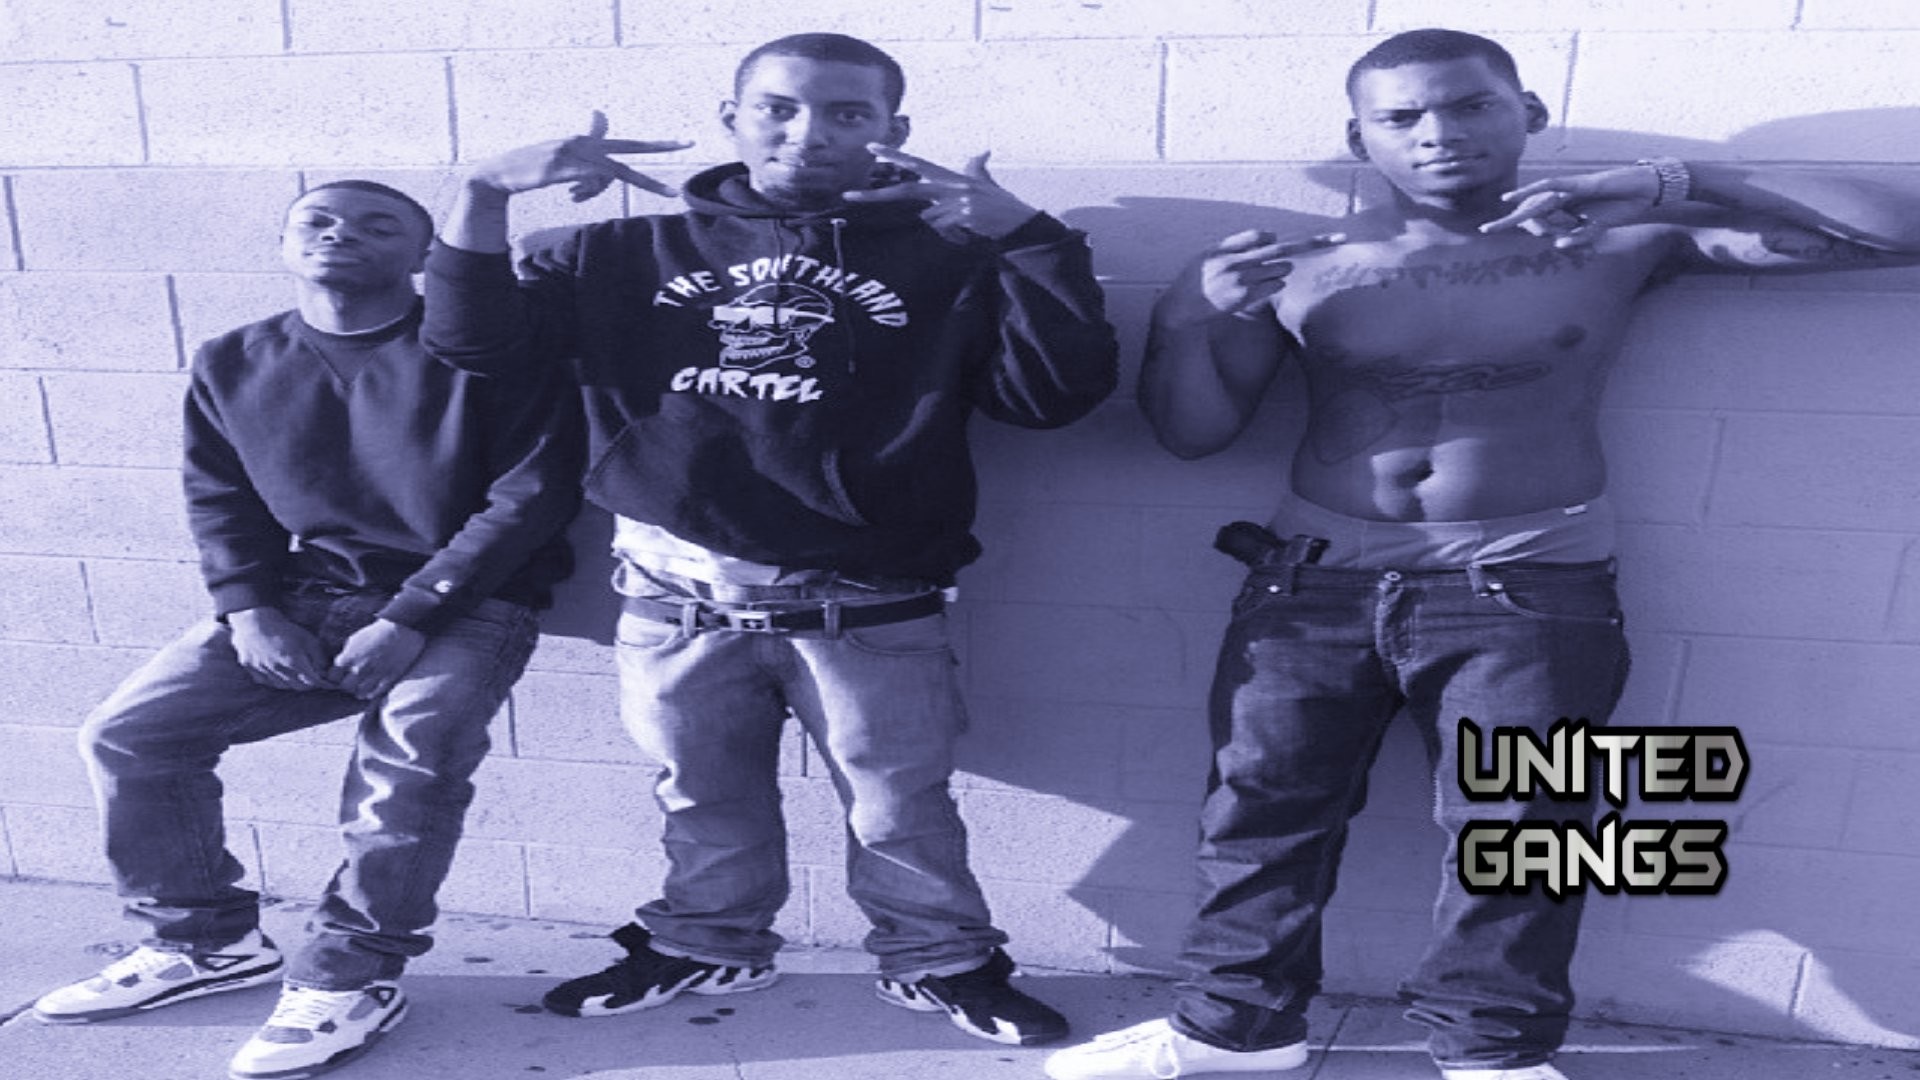 1920x1080 The Naughty Nasty Gangster Crips (2NGC), also known as the Naughty And  Nasty Crips or 2 Naughty 2 Naughty Crips are primarily, but exclusly, ...